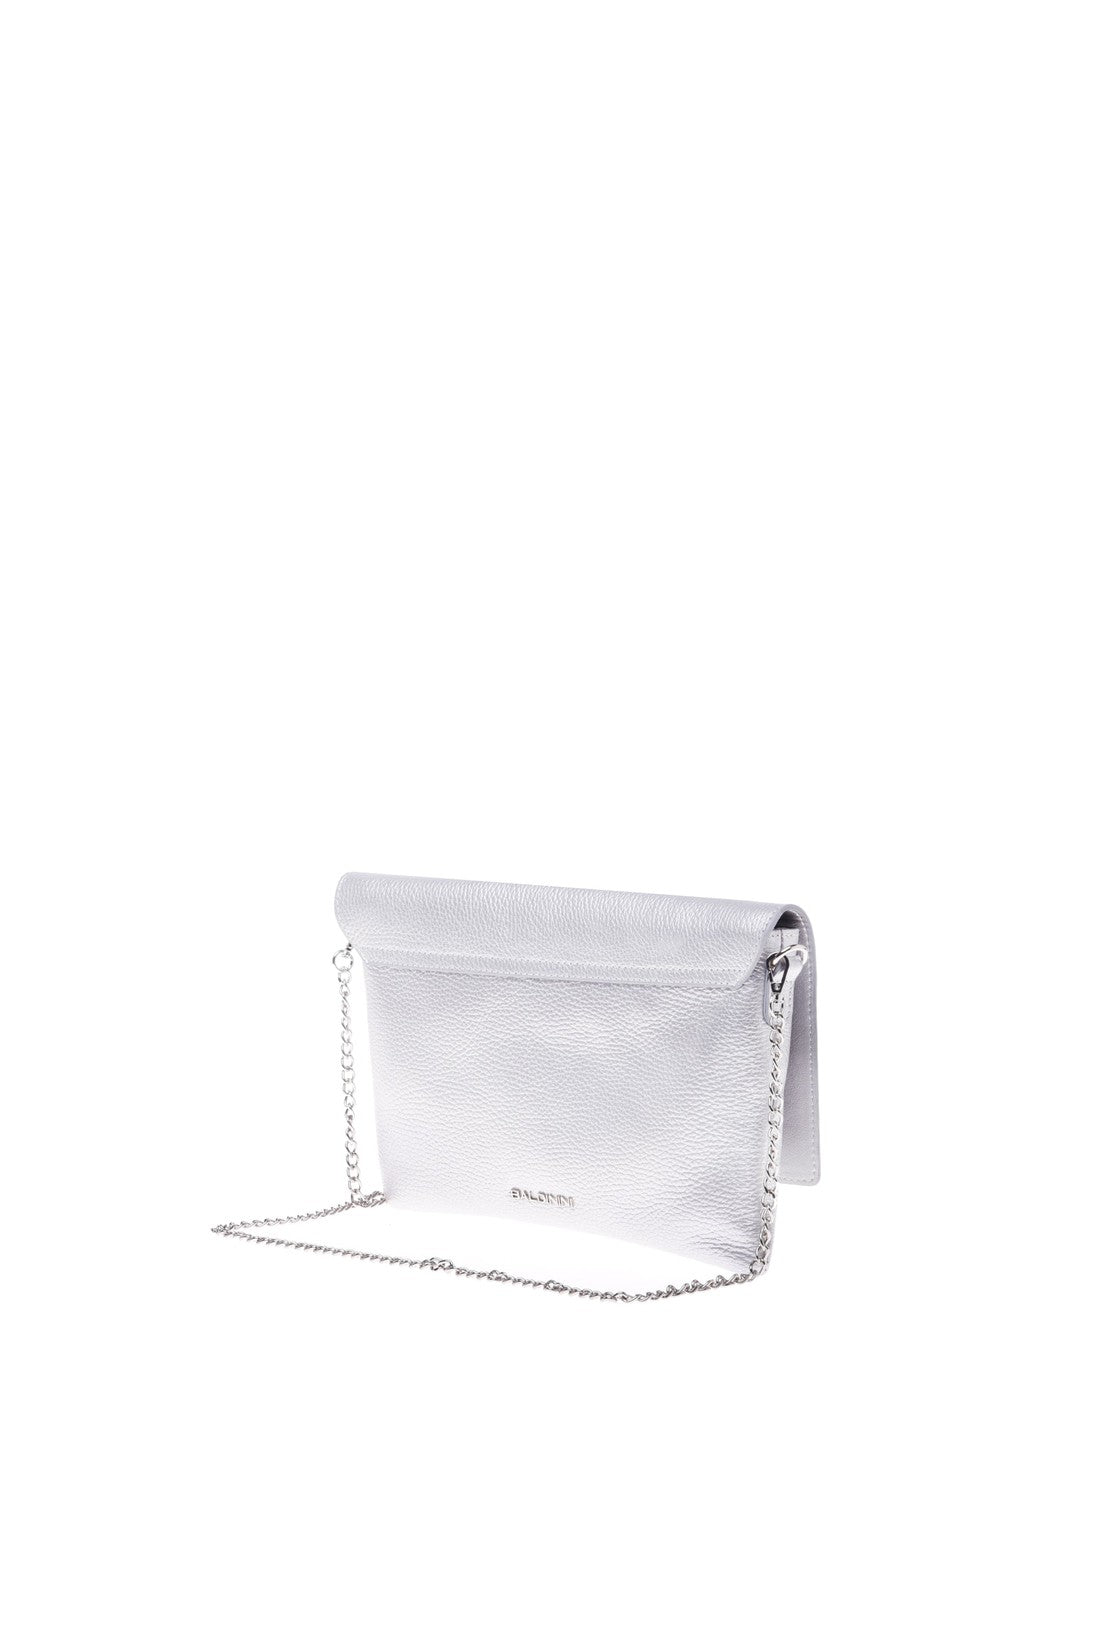 Clutch bag in silver tumbled leather